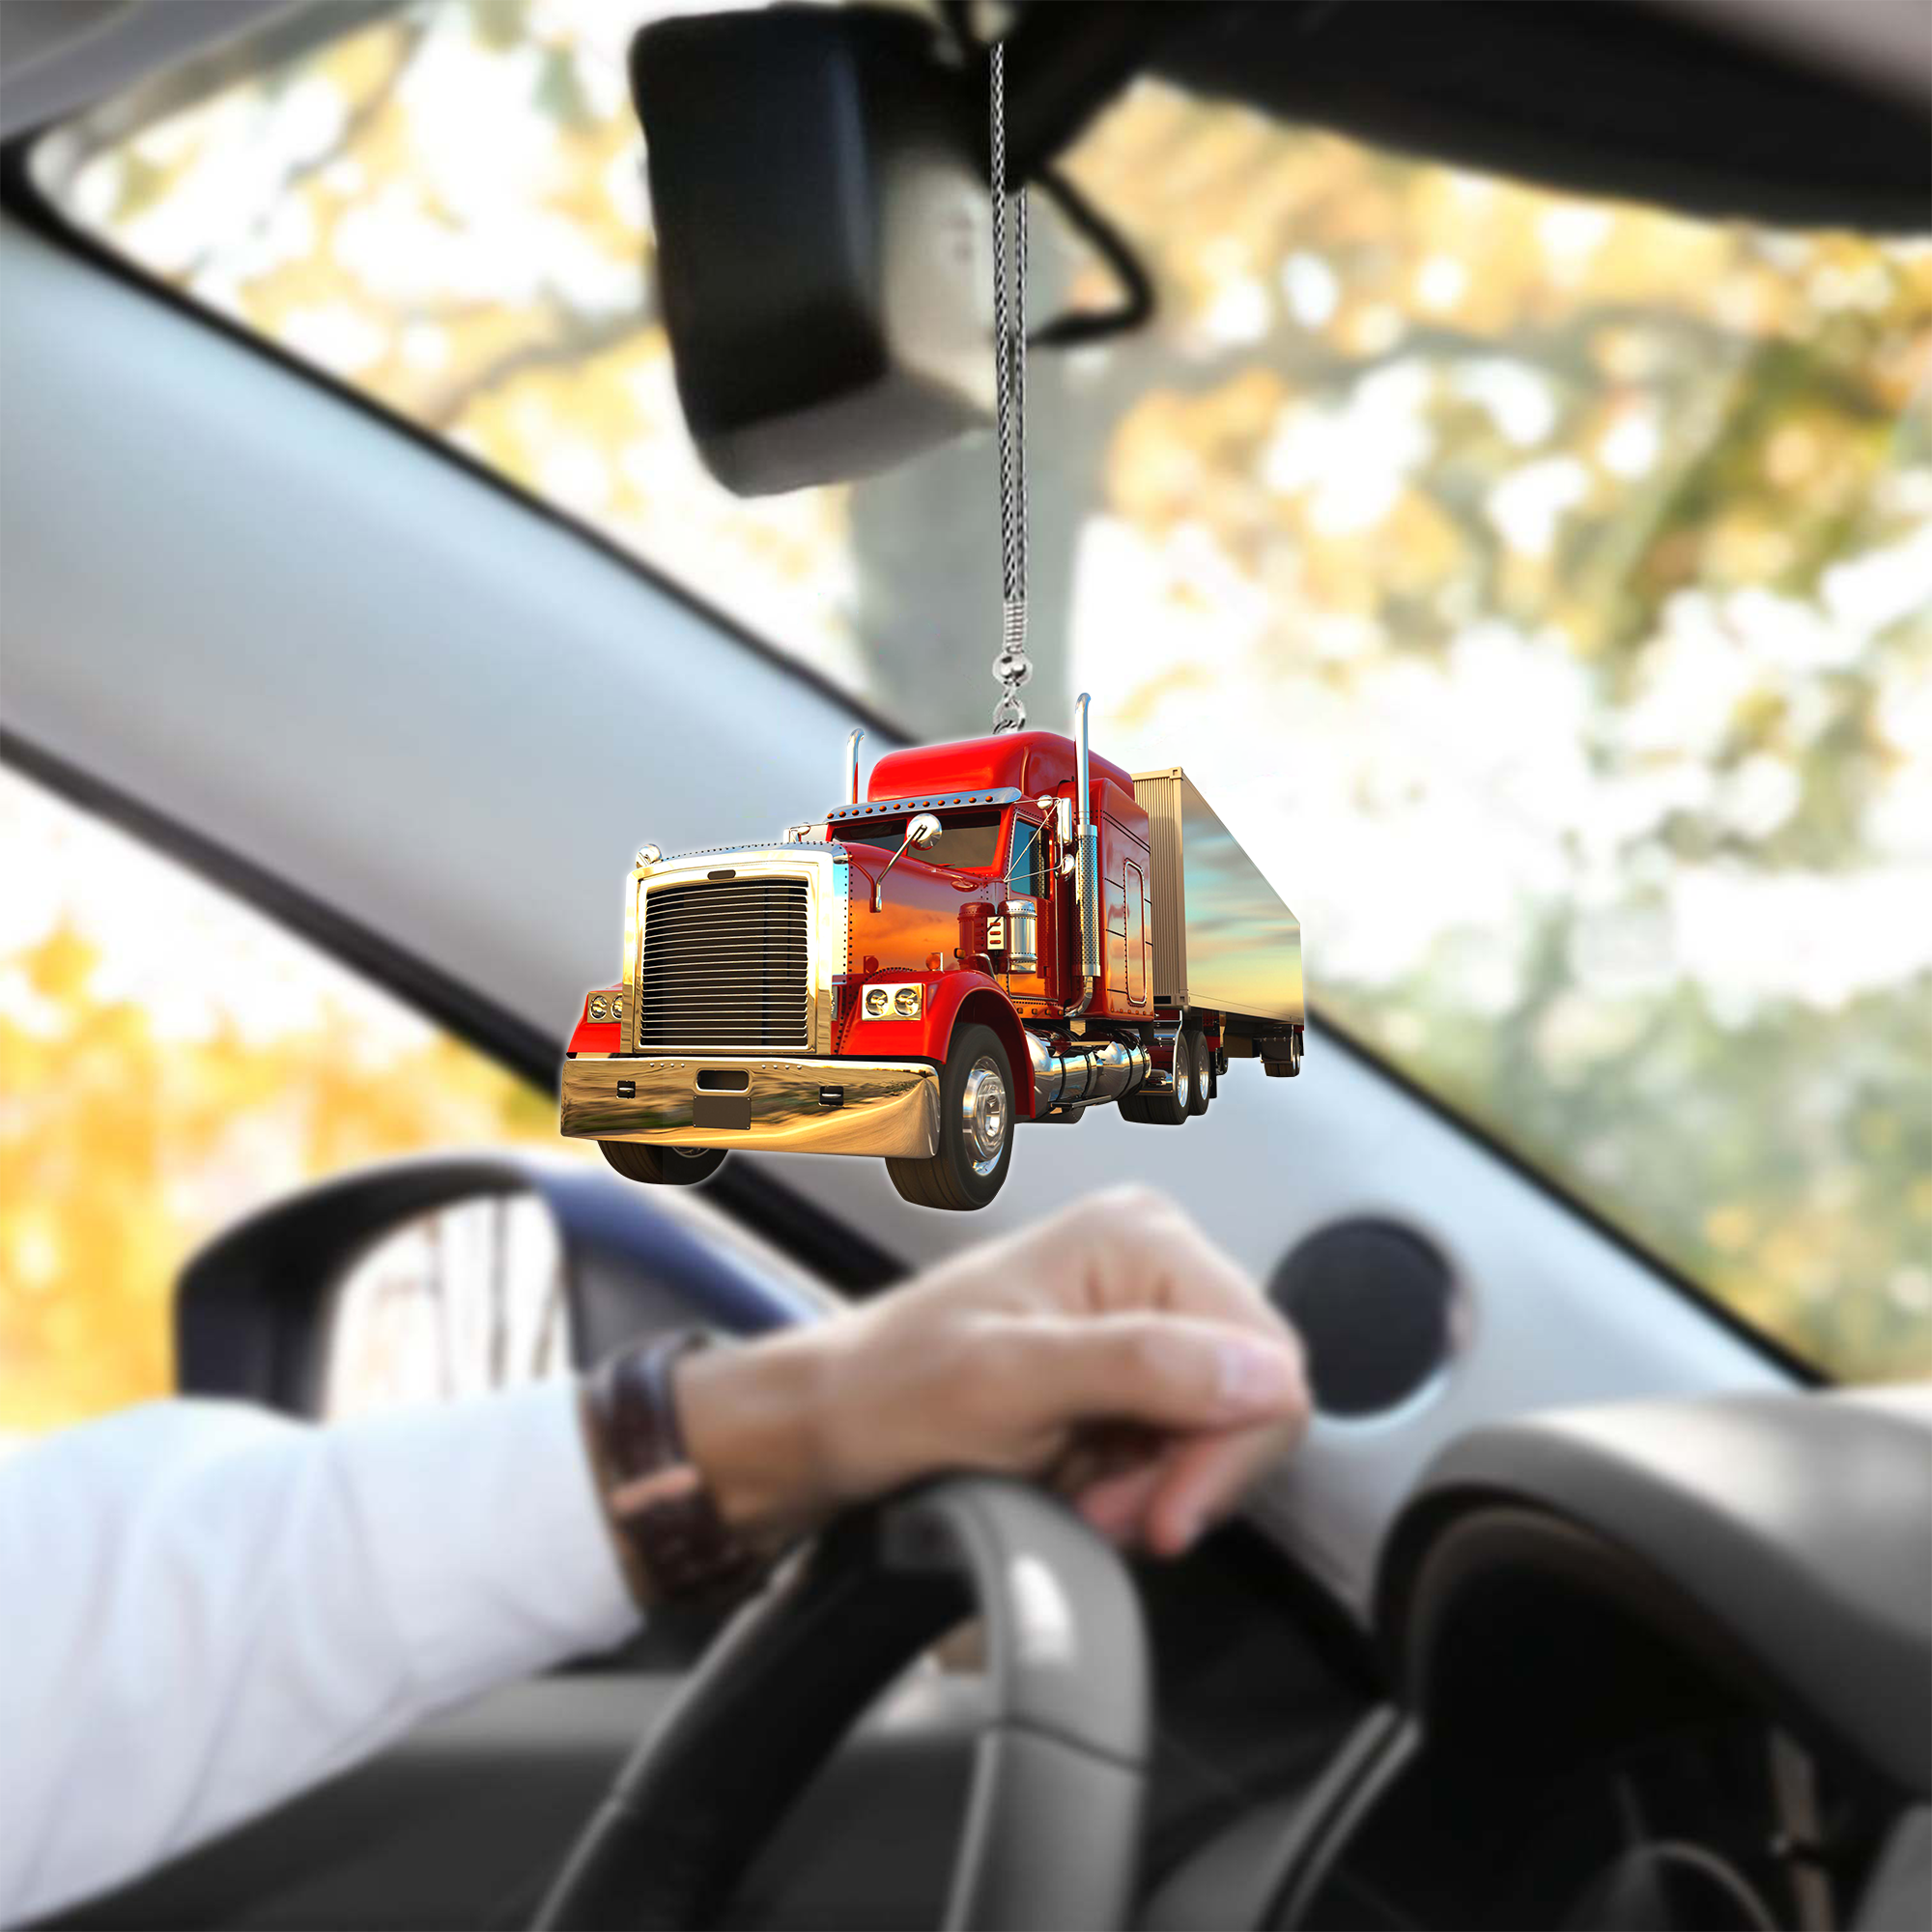 Red Truck Car Hanging Ornament Truck Ornament For Auto